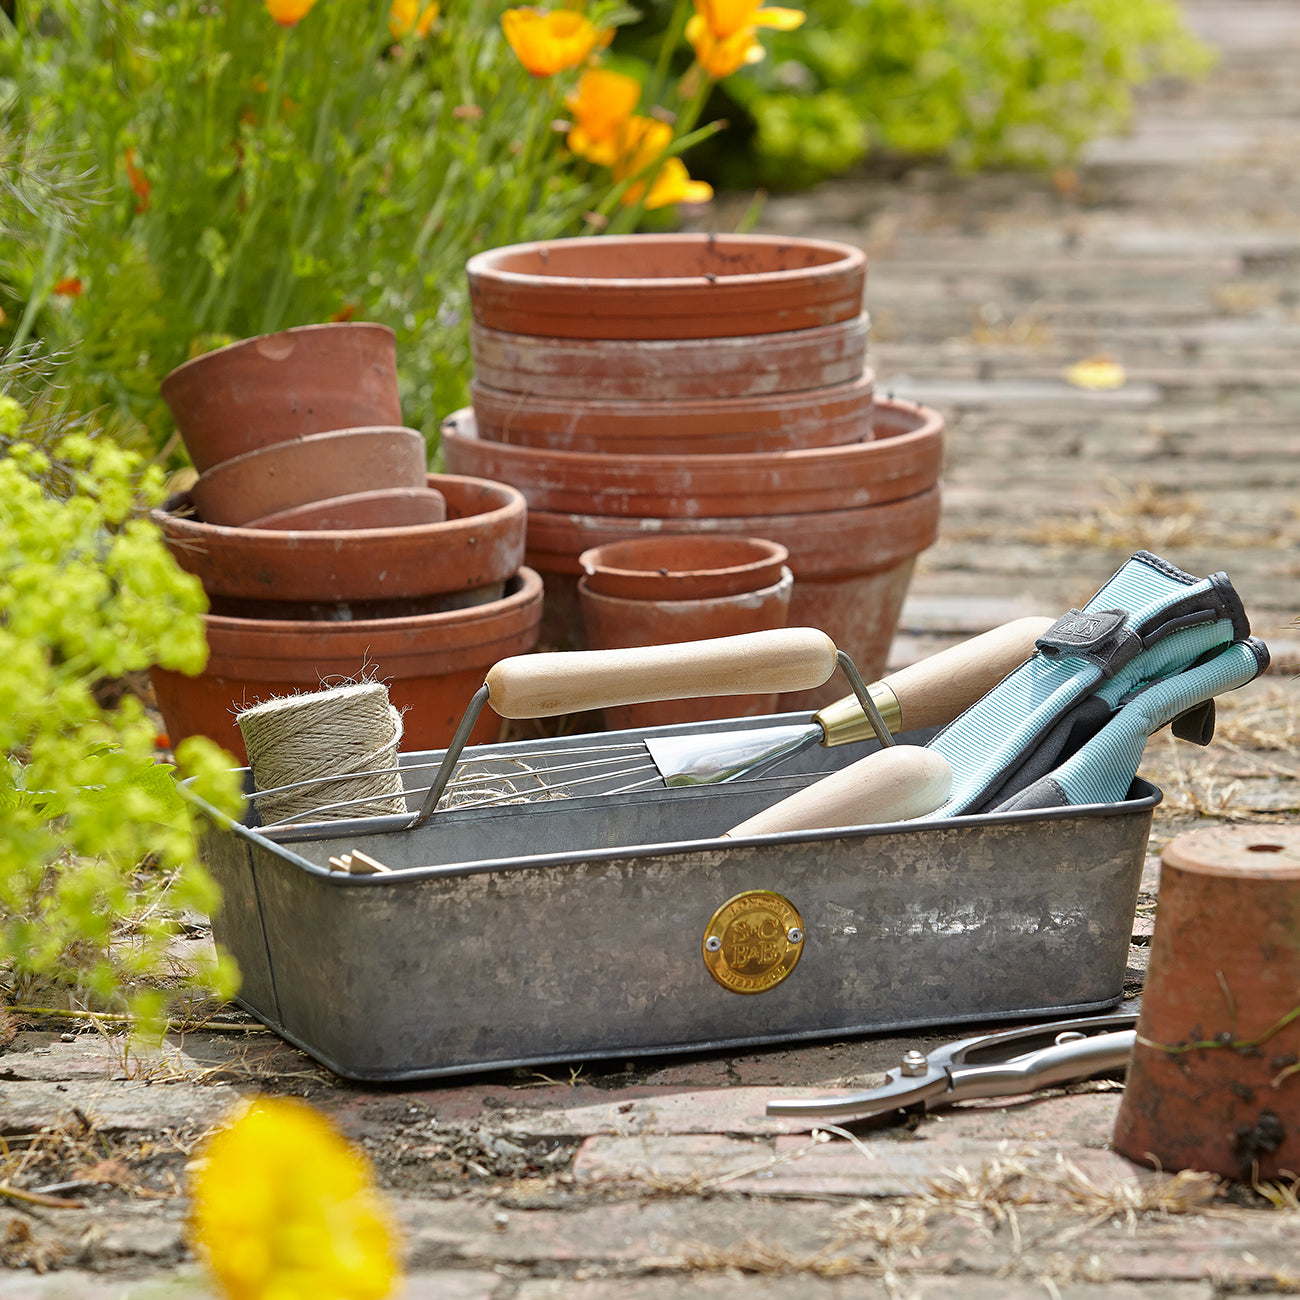 A stylish and practical garden trug in galvanised steel, ideal for holding tools, labels, twine and other gardener's bits and bobs as you garden.